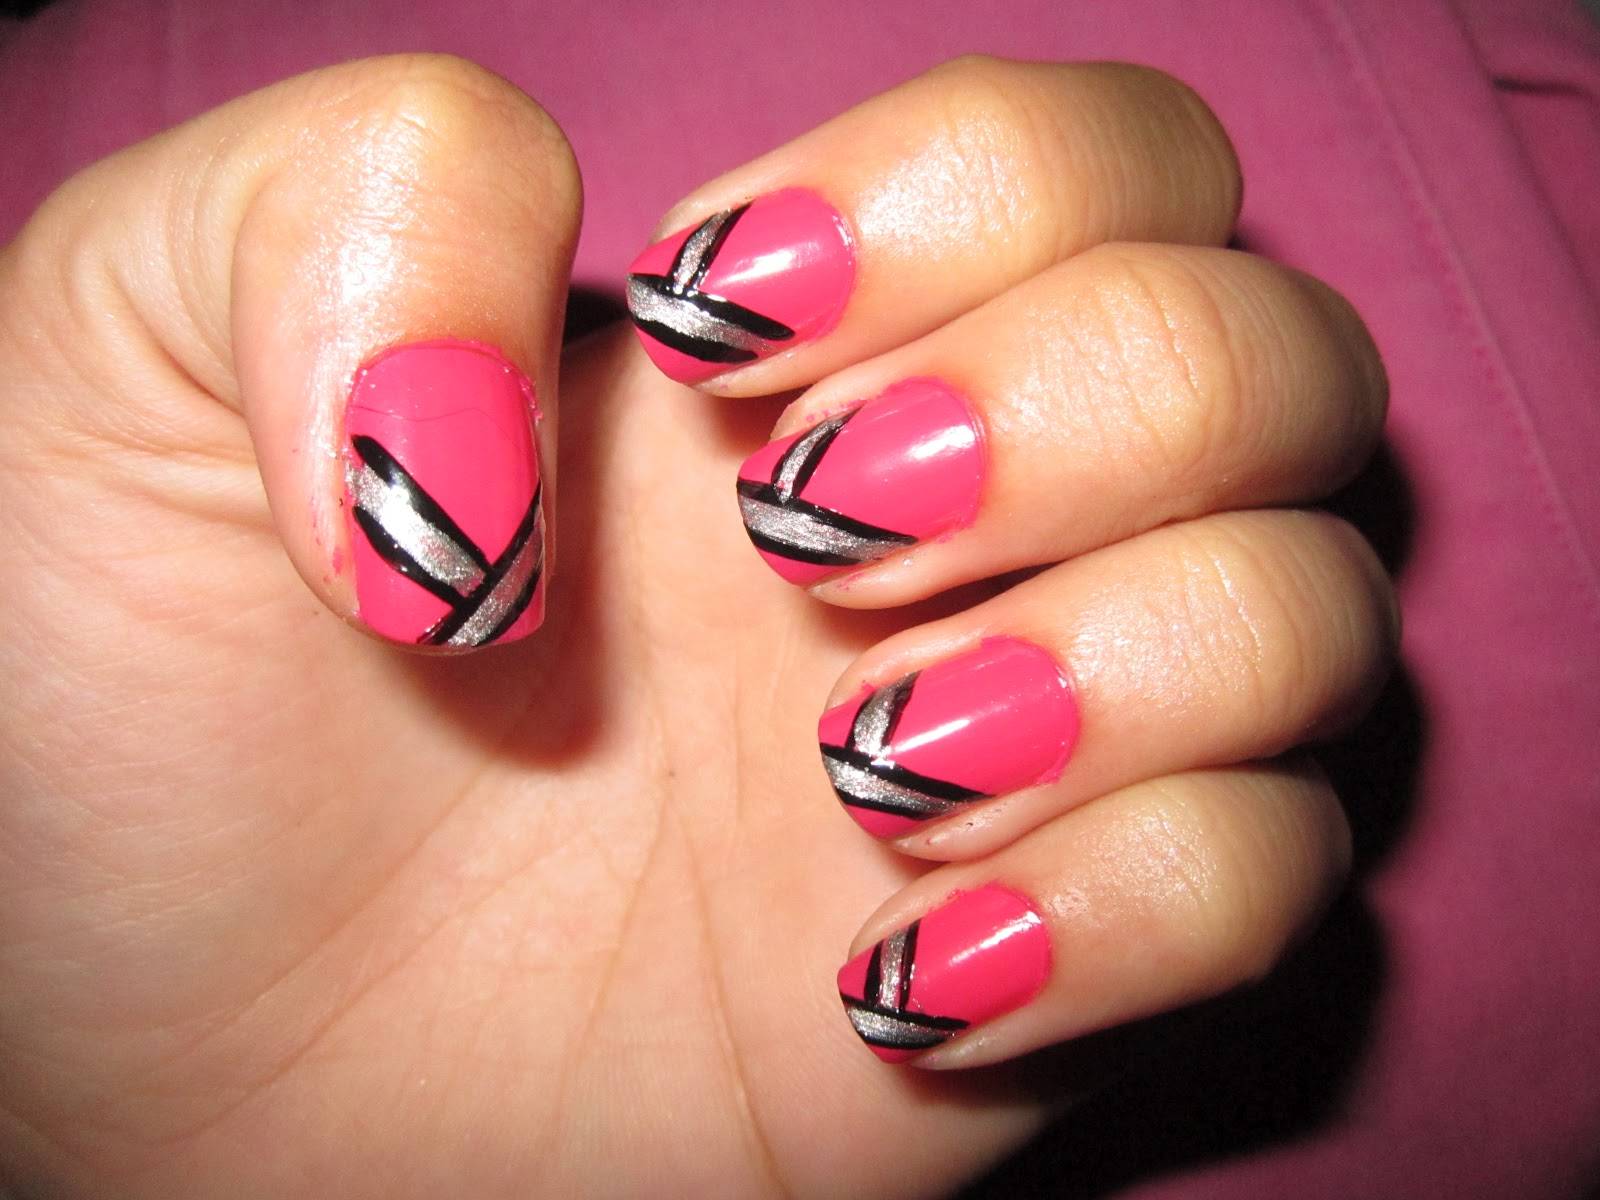 5. Cute and Easy Nail Art Designs - wide 7